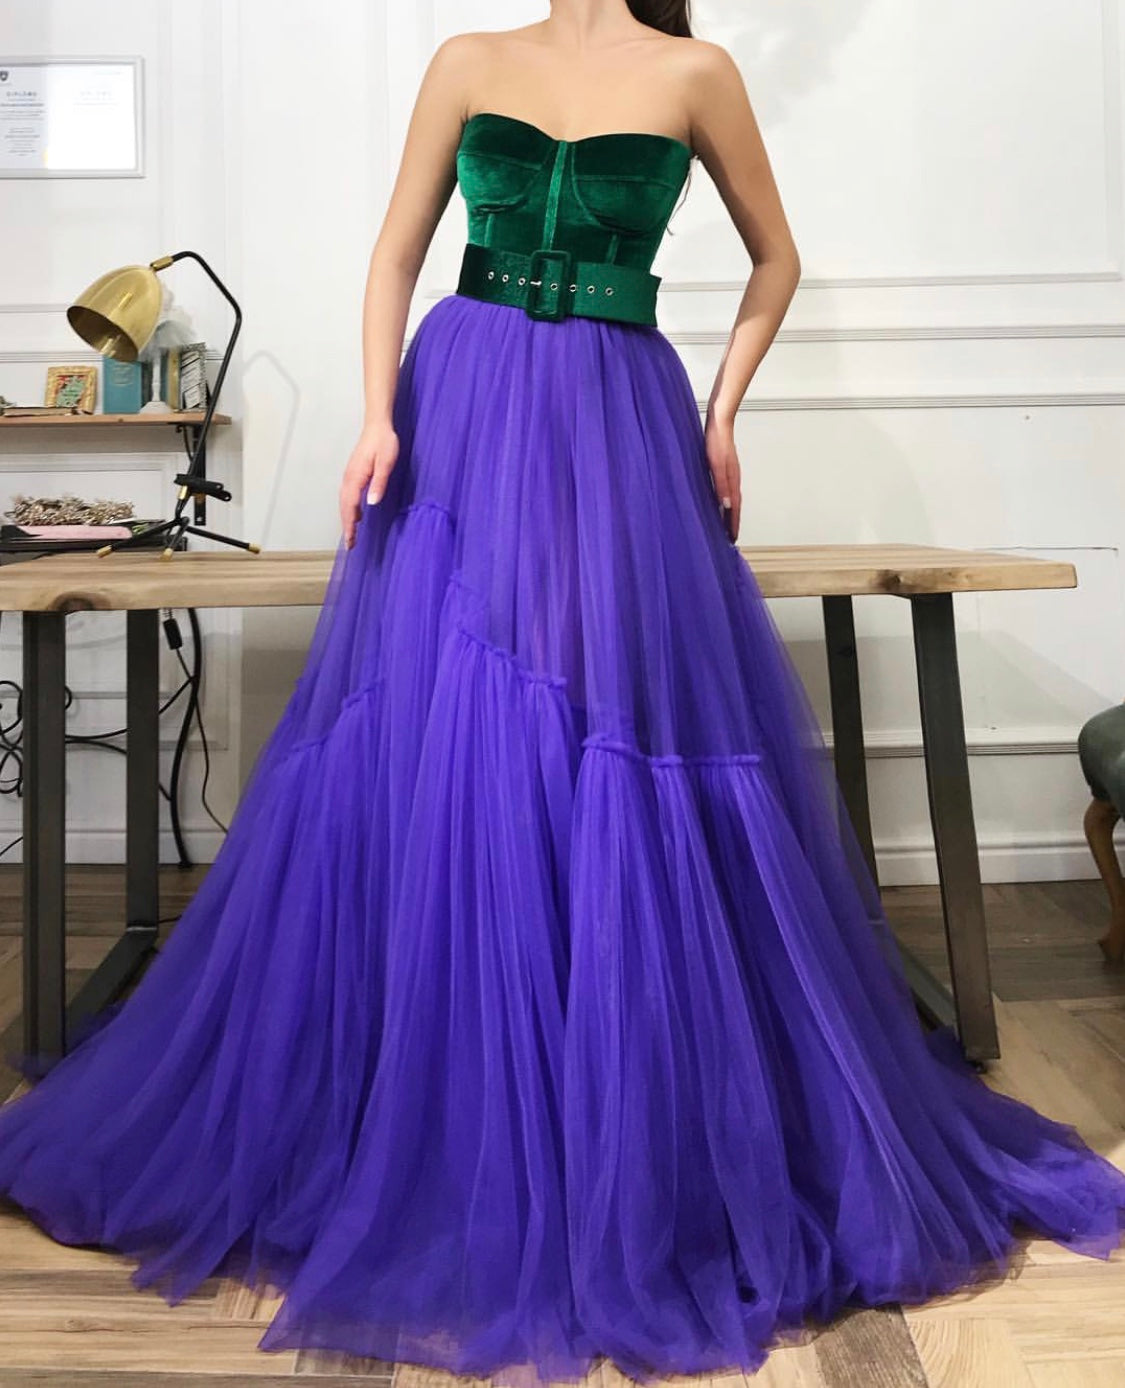 Green and purple A-Line dress with no sleeves and belt